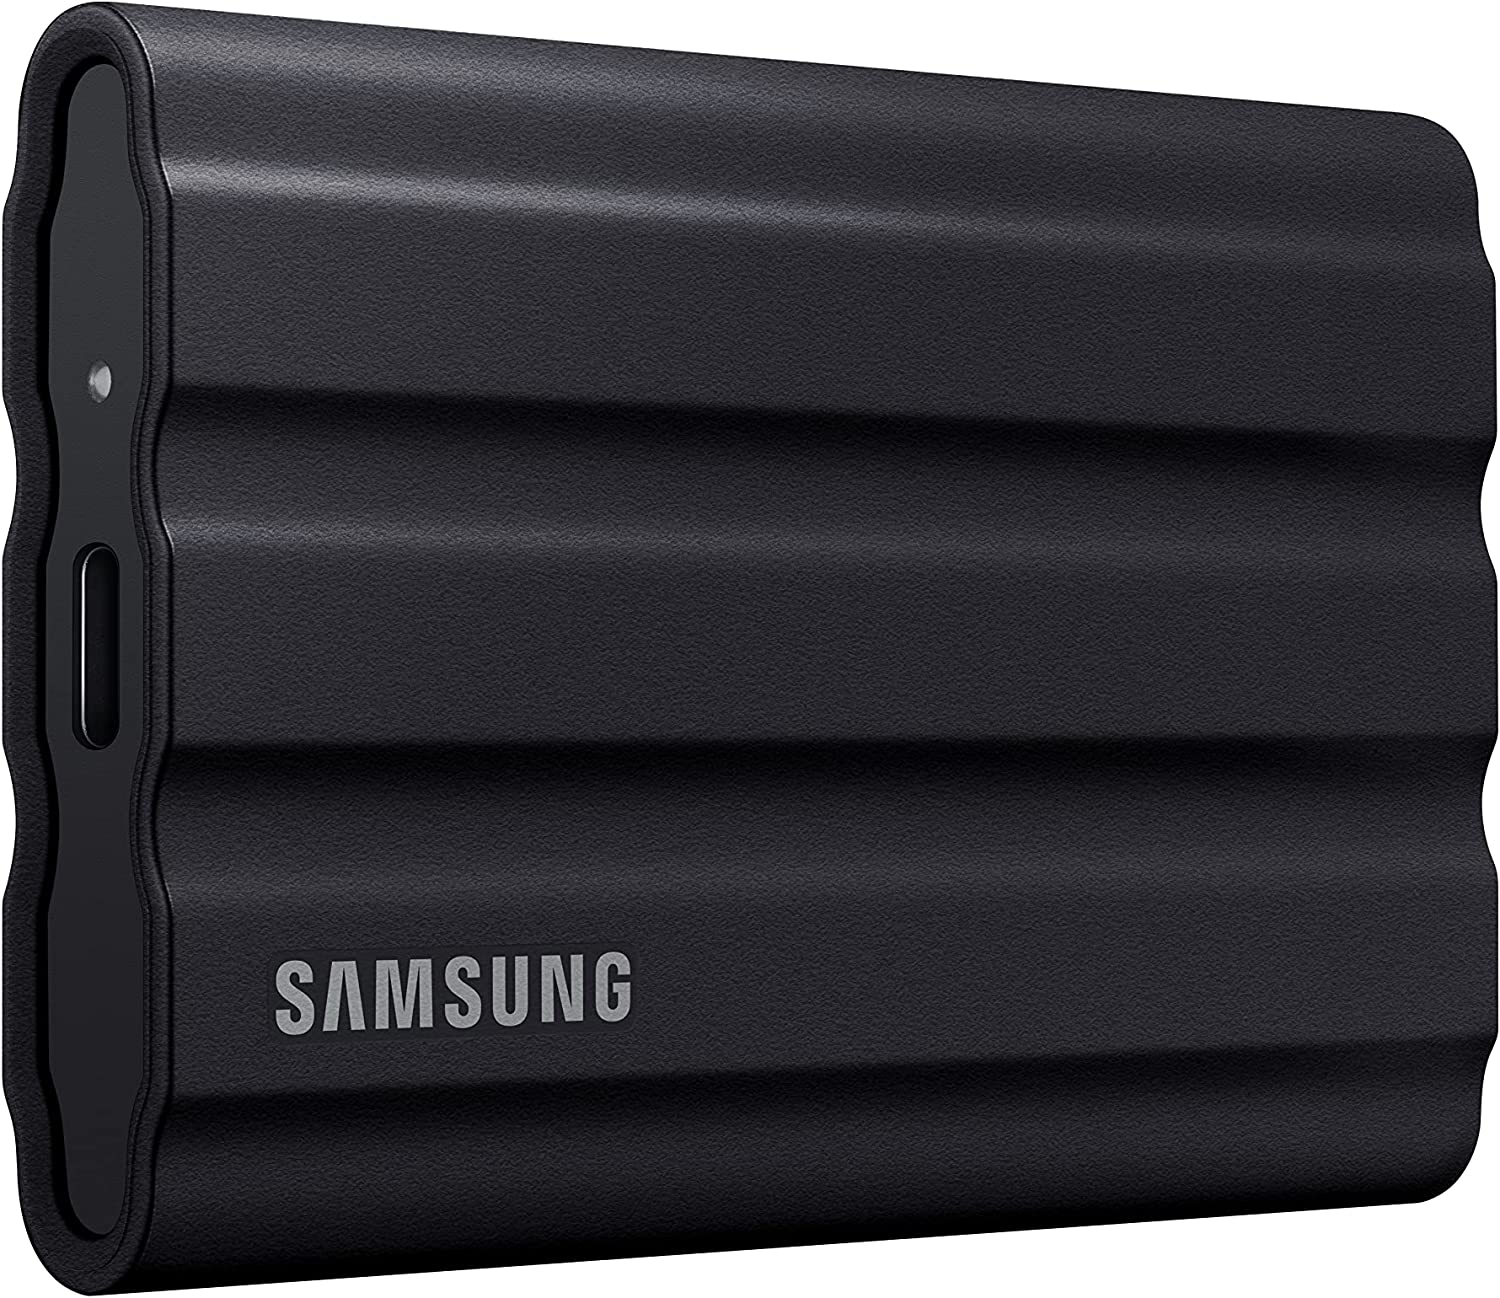 Samsung Disque dur externe SSD 1 To USB 3.2